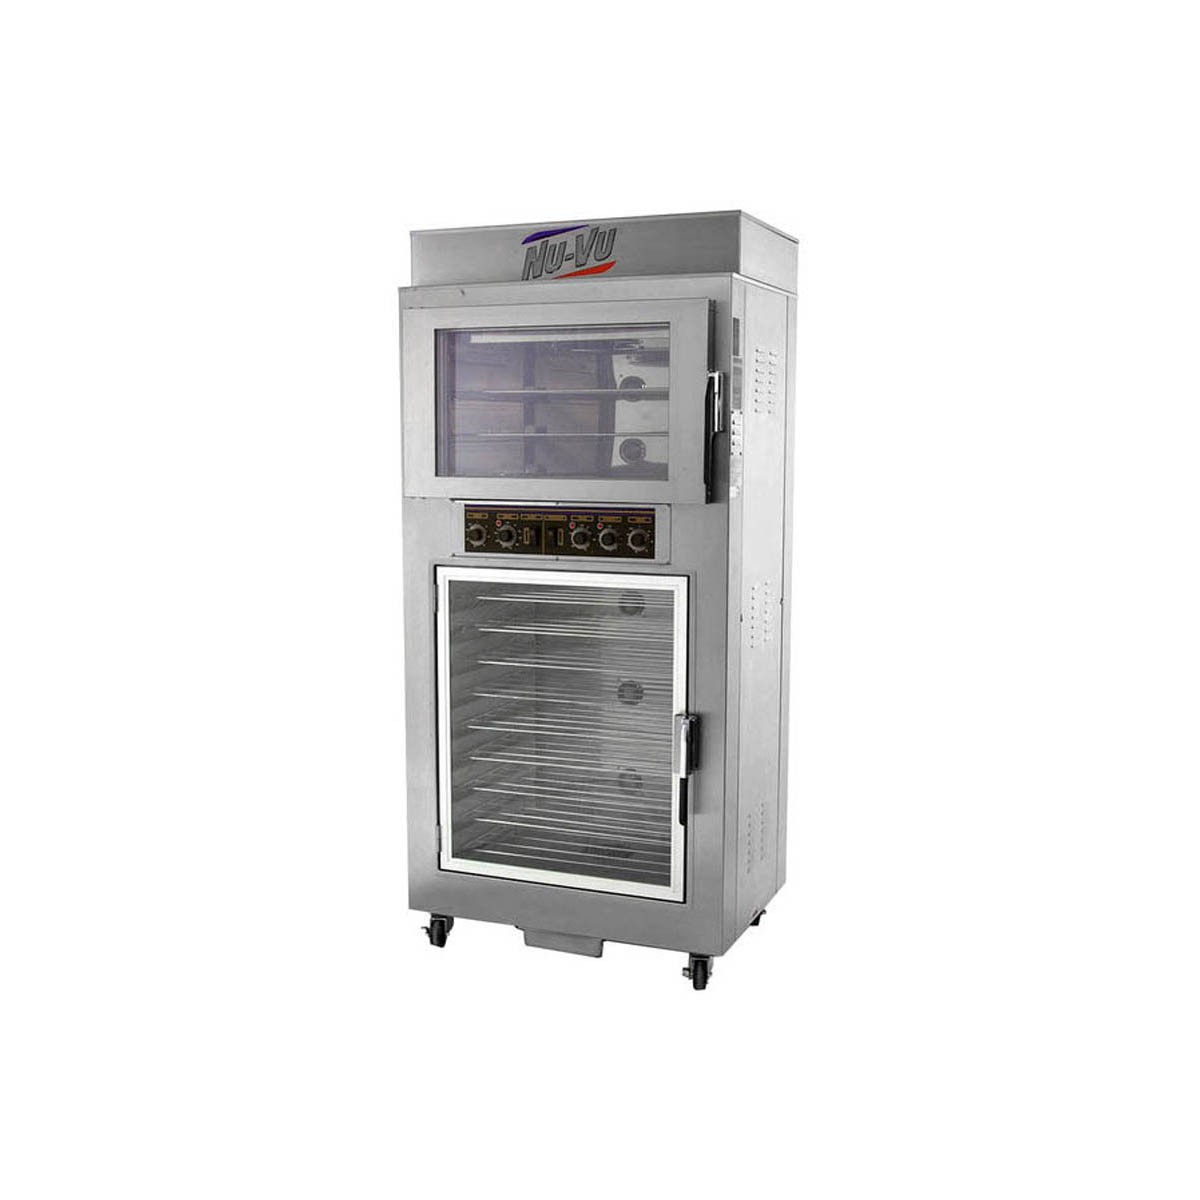 NU-VU QB-3/9 Electric Convection Oven / Proofer with Heat and Humidity